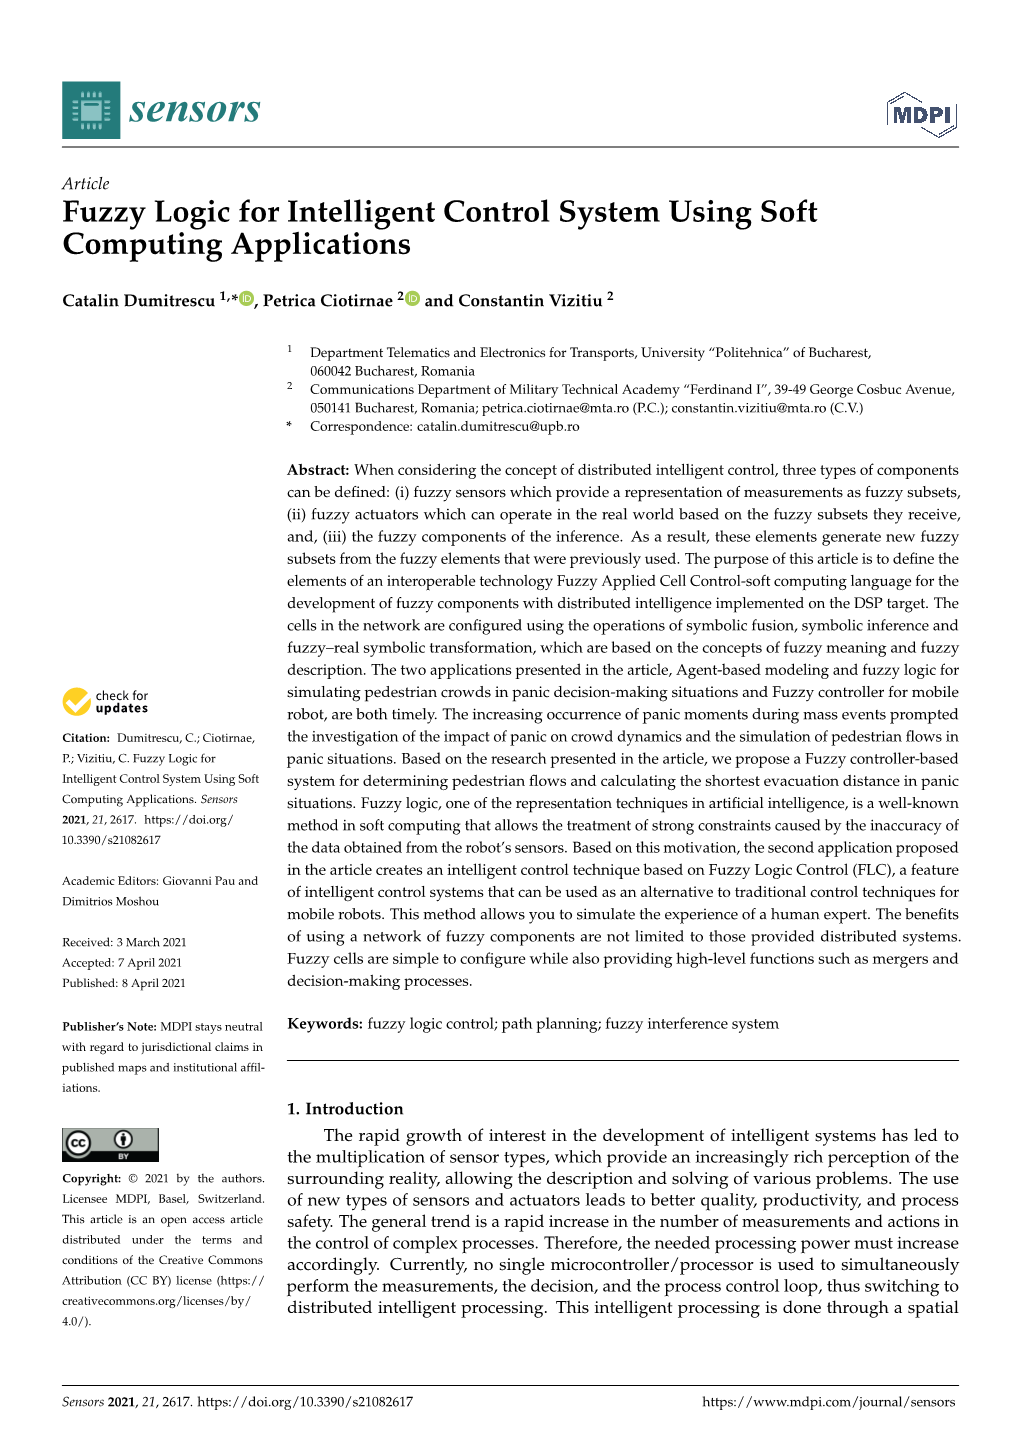 Fuzzy Logic for Intelligent Control System Using Soft Computing Applications